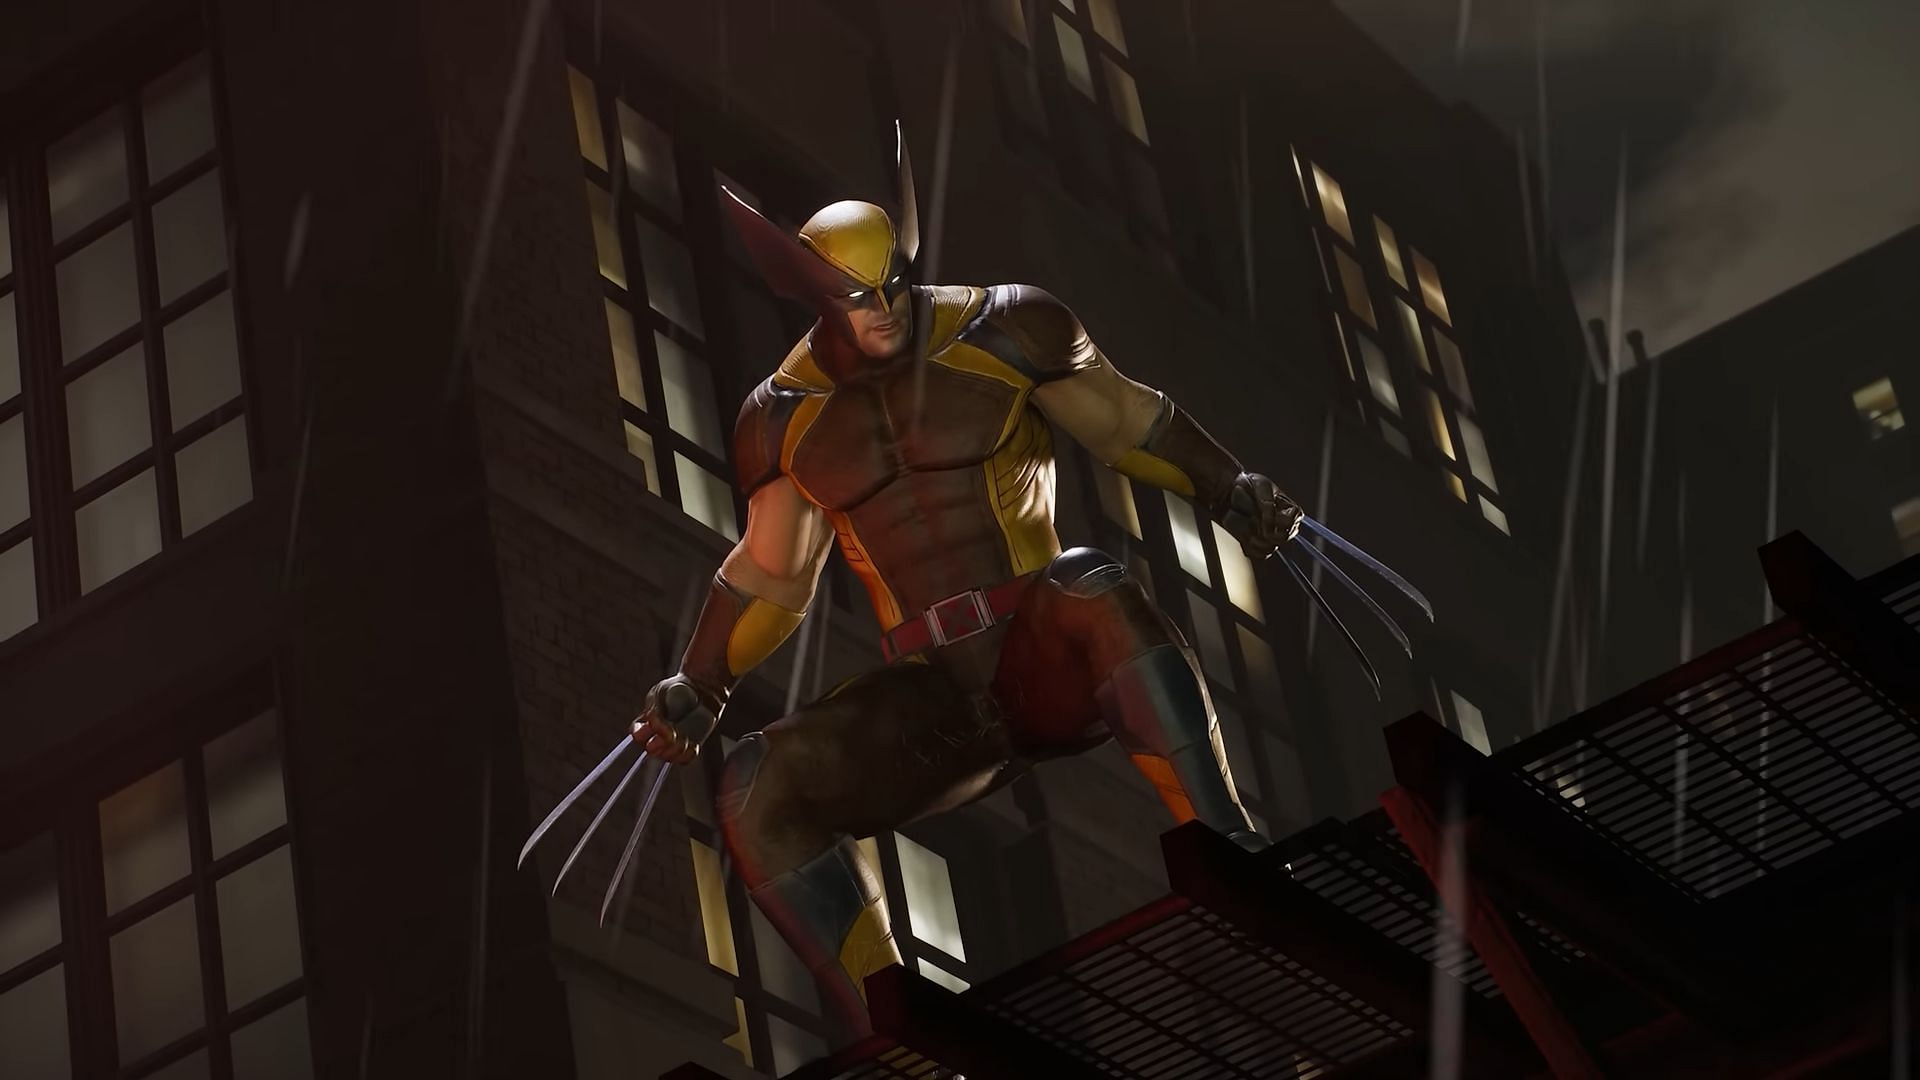 Weapon X aka Wolverine makes an appearance in Marvel